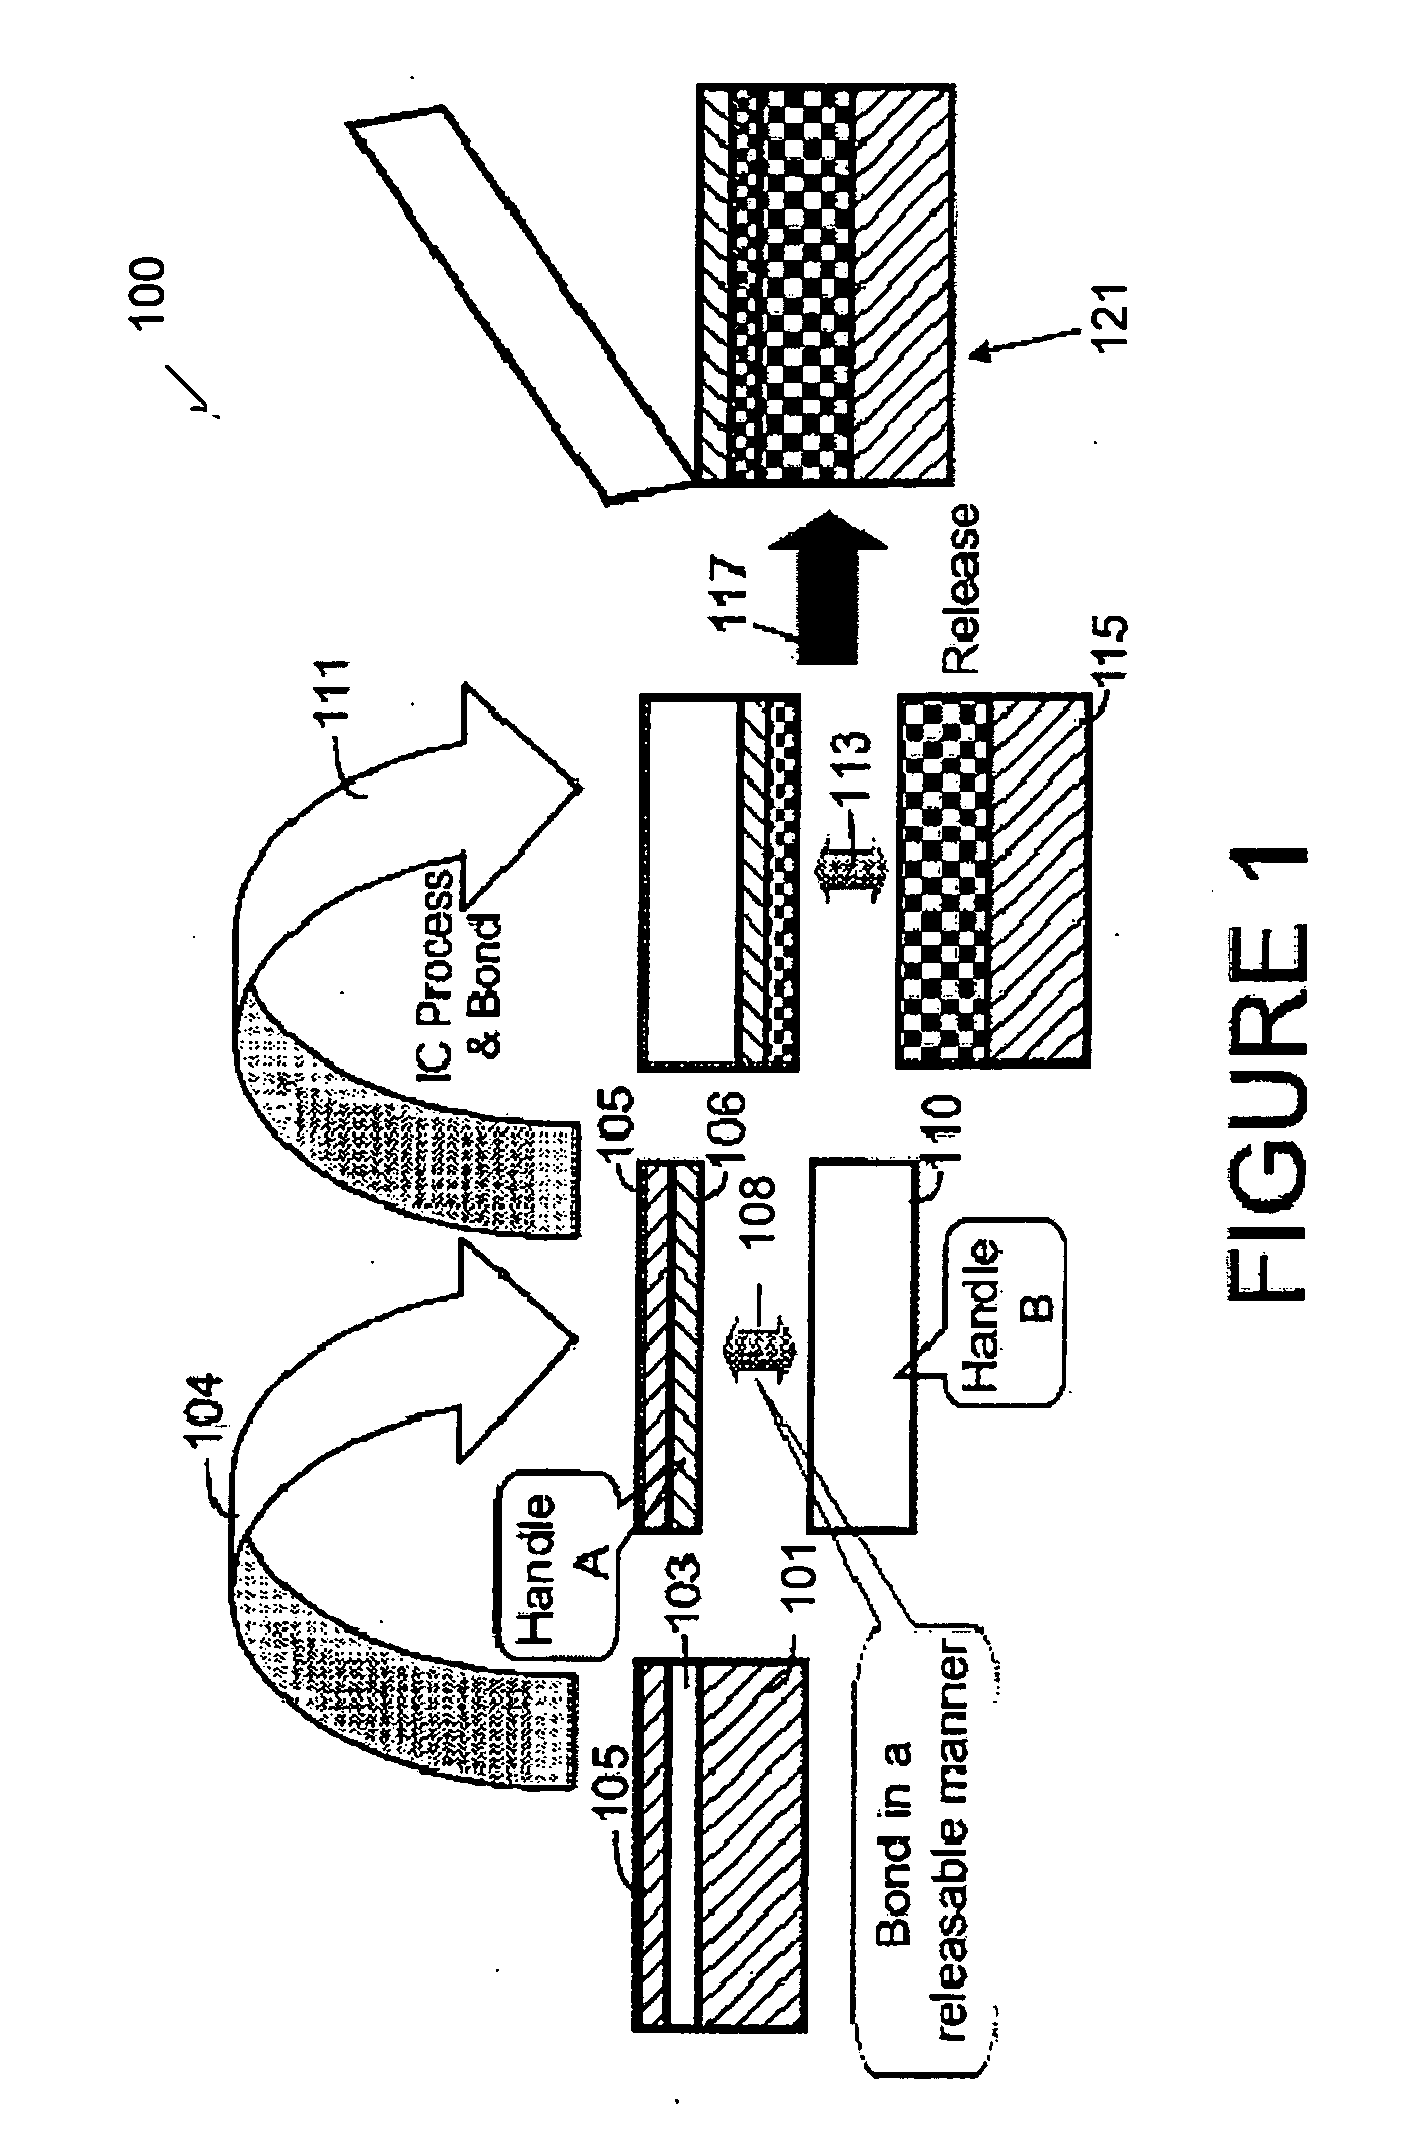 Thin handle substrate method and structure for fabricating devices using one or more films provided by a layer transfer process